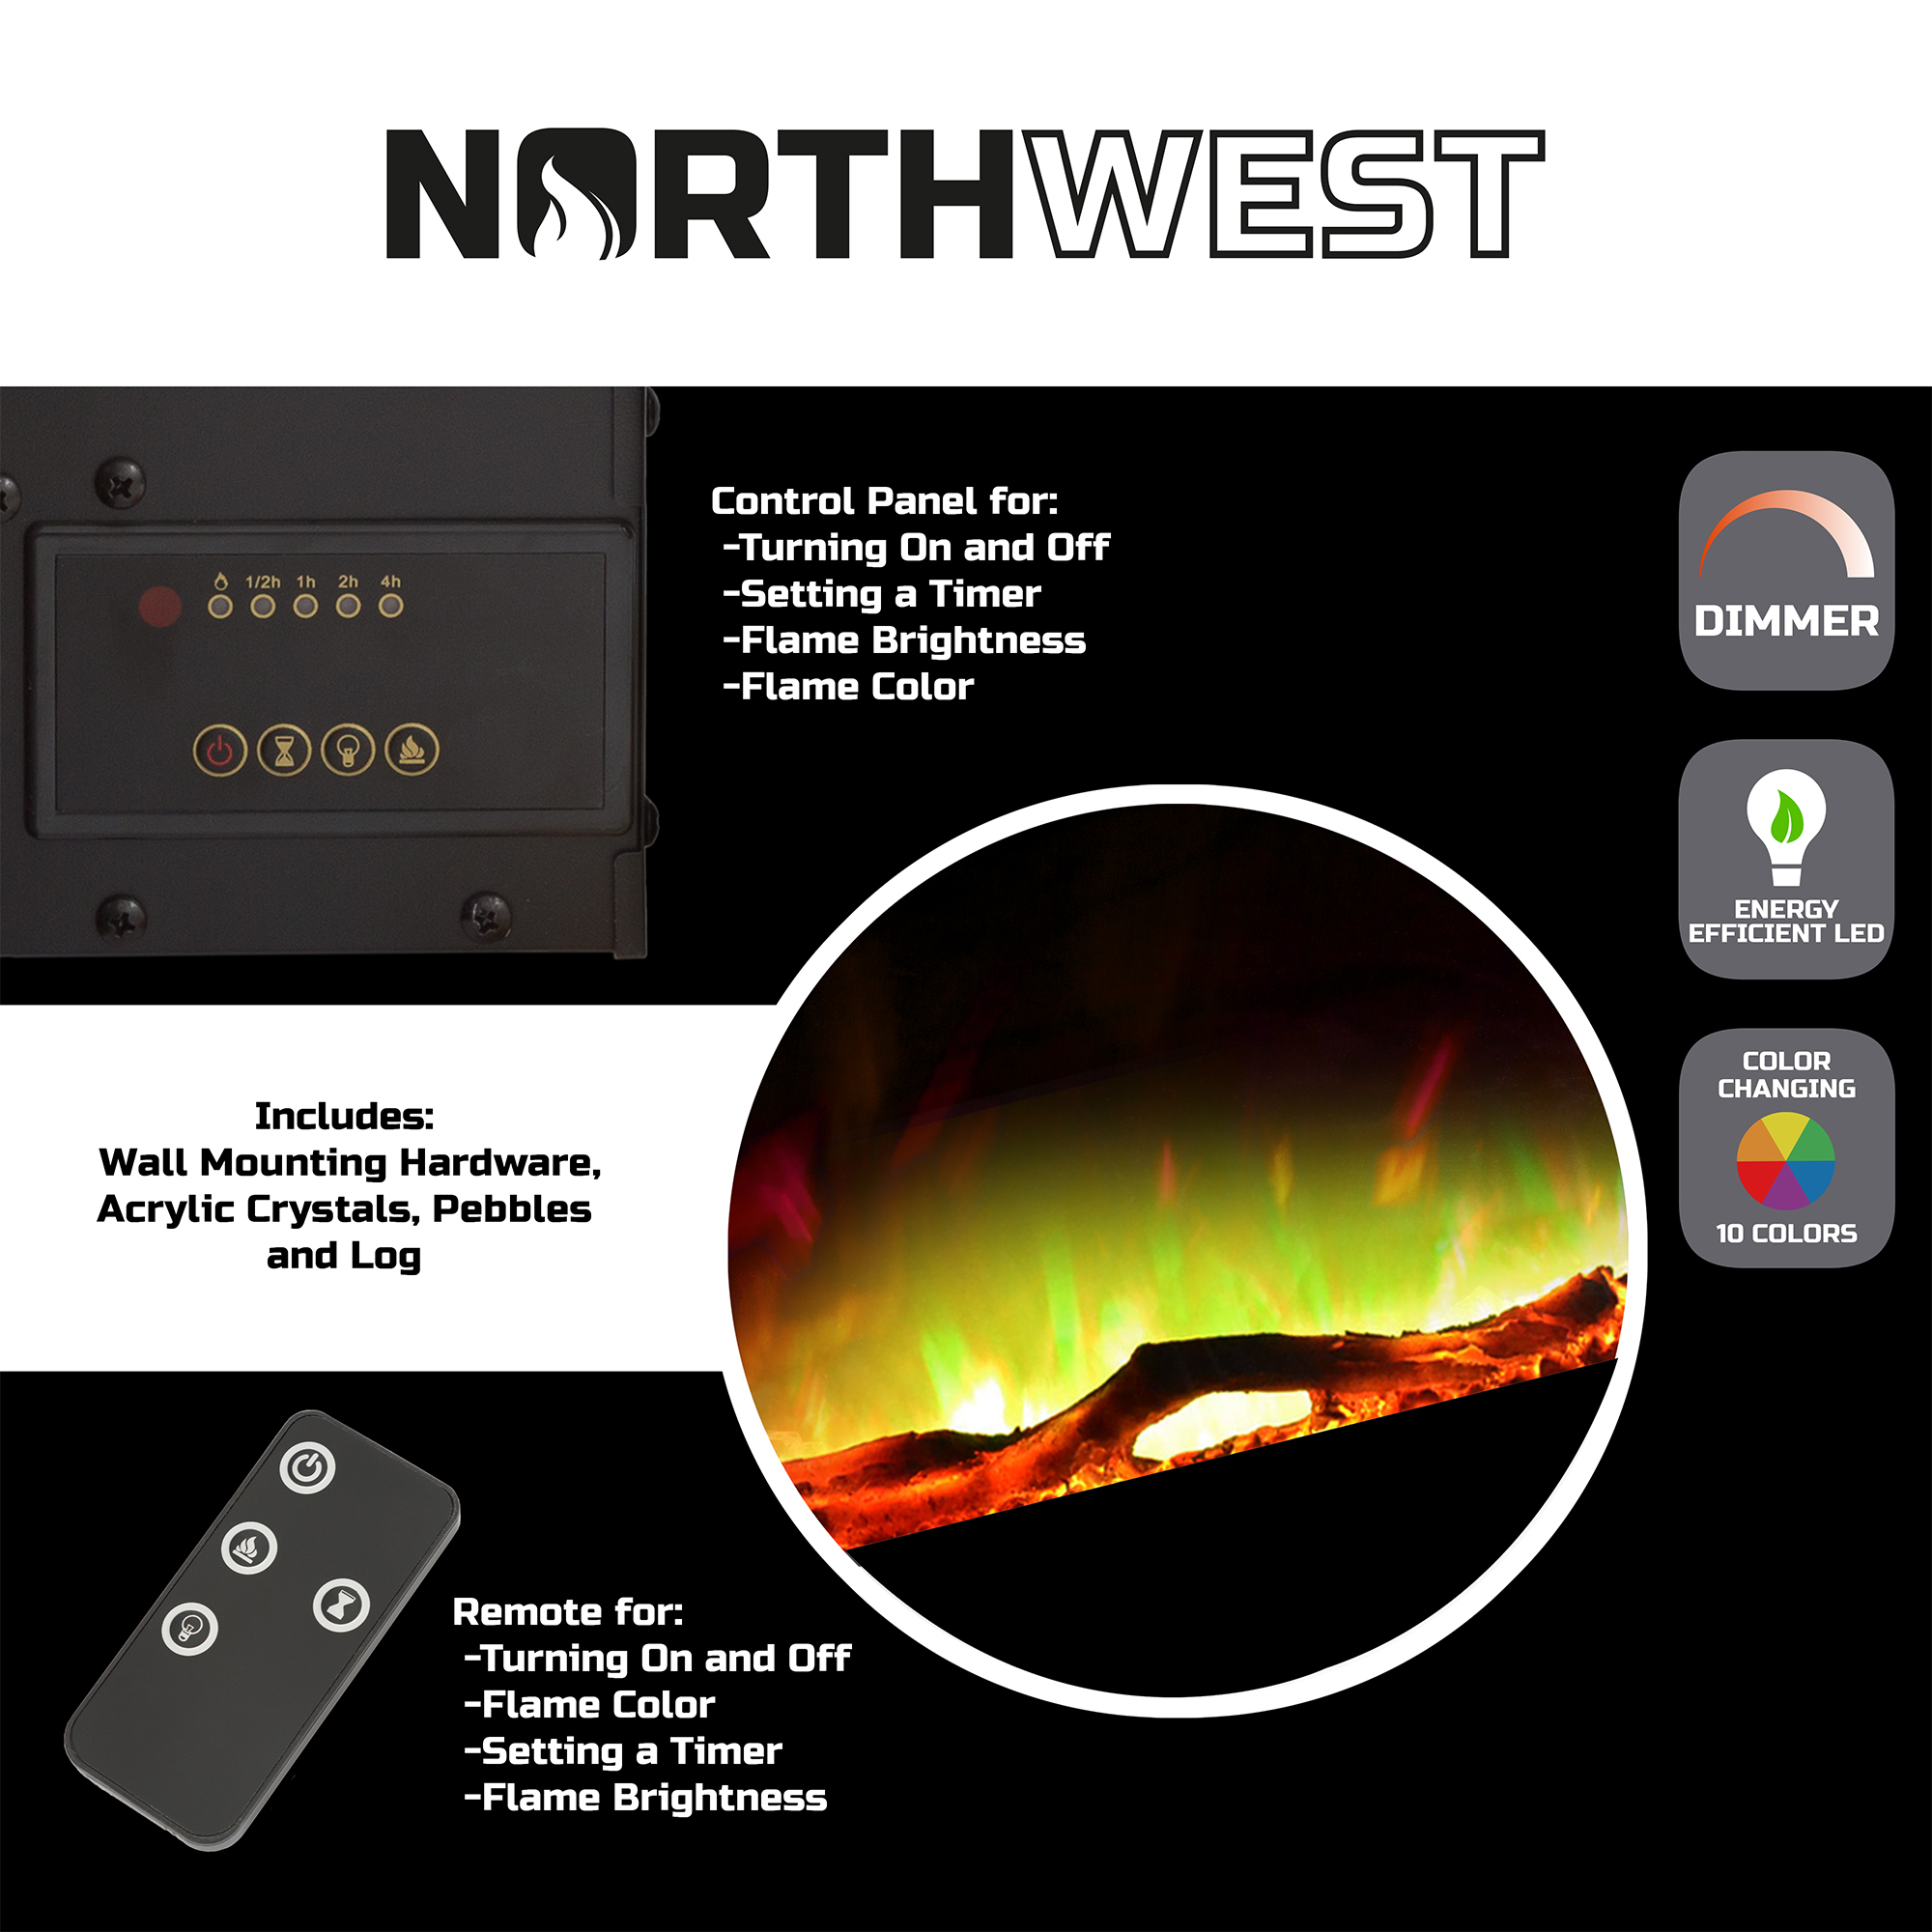 Northwest 36-inch Wall-Mount Modern Electric Fireplace with Remote, Black - image 2 of 5